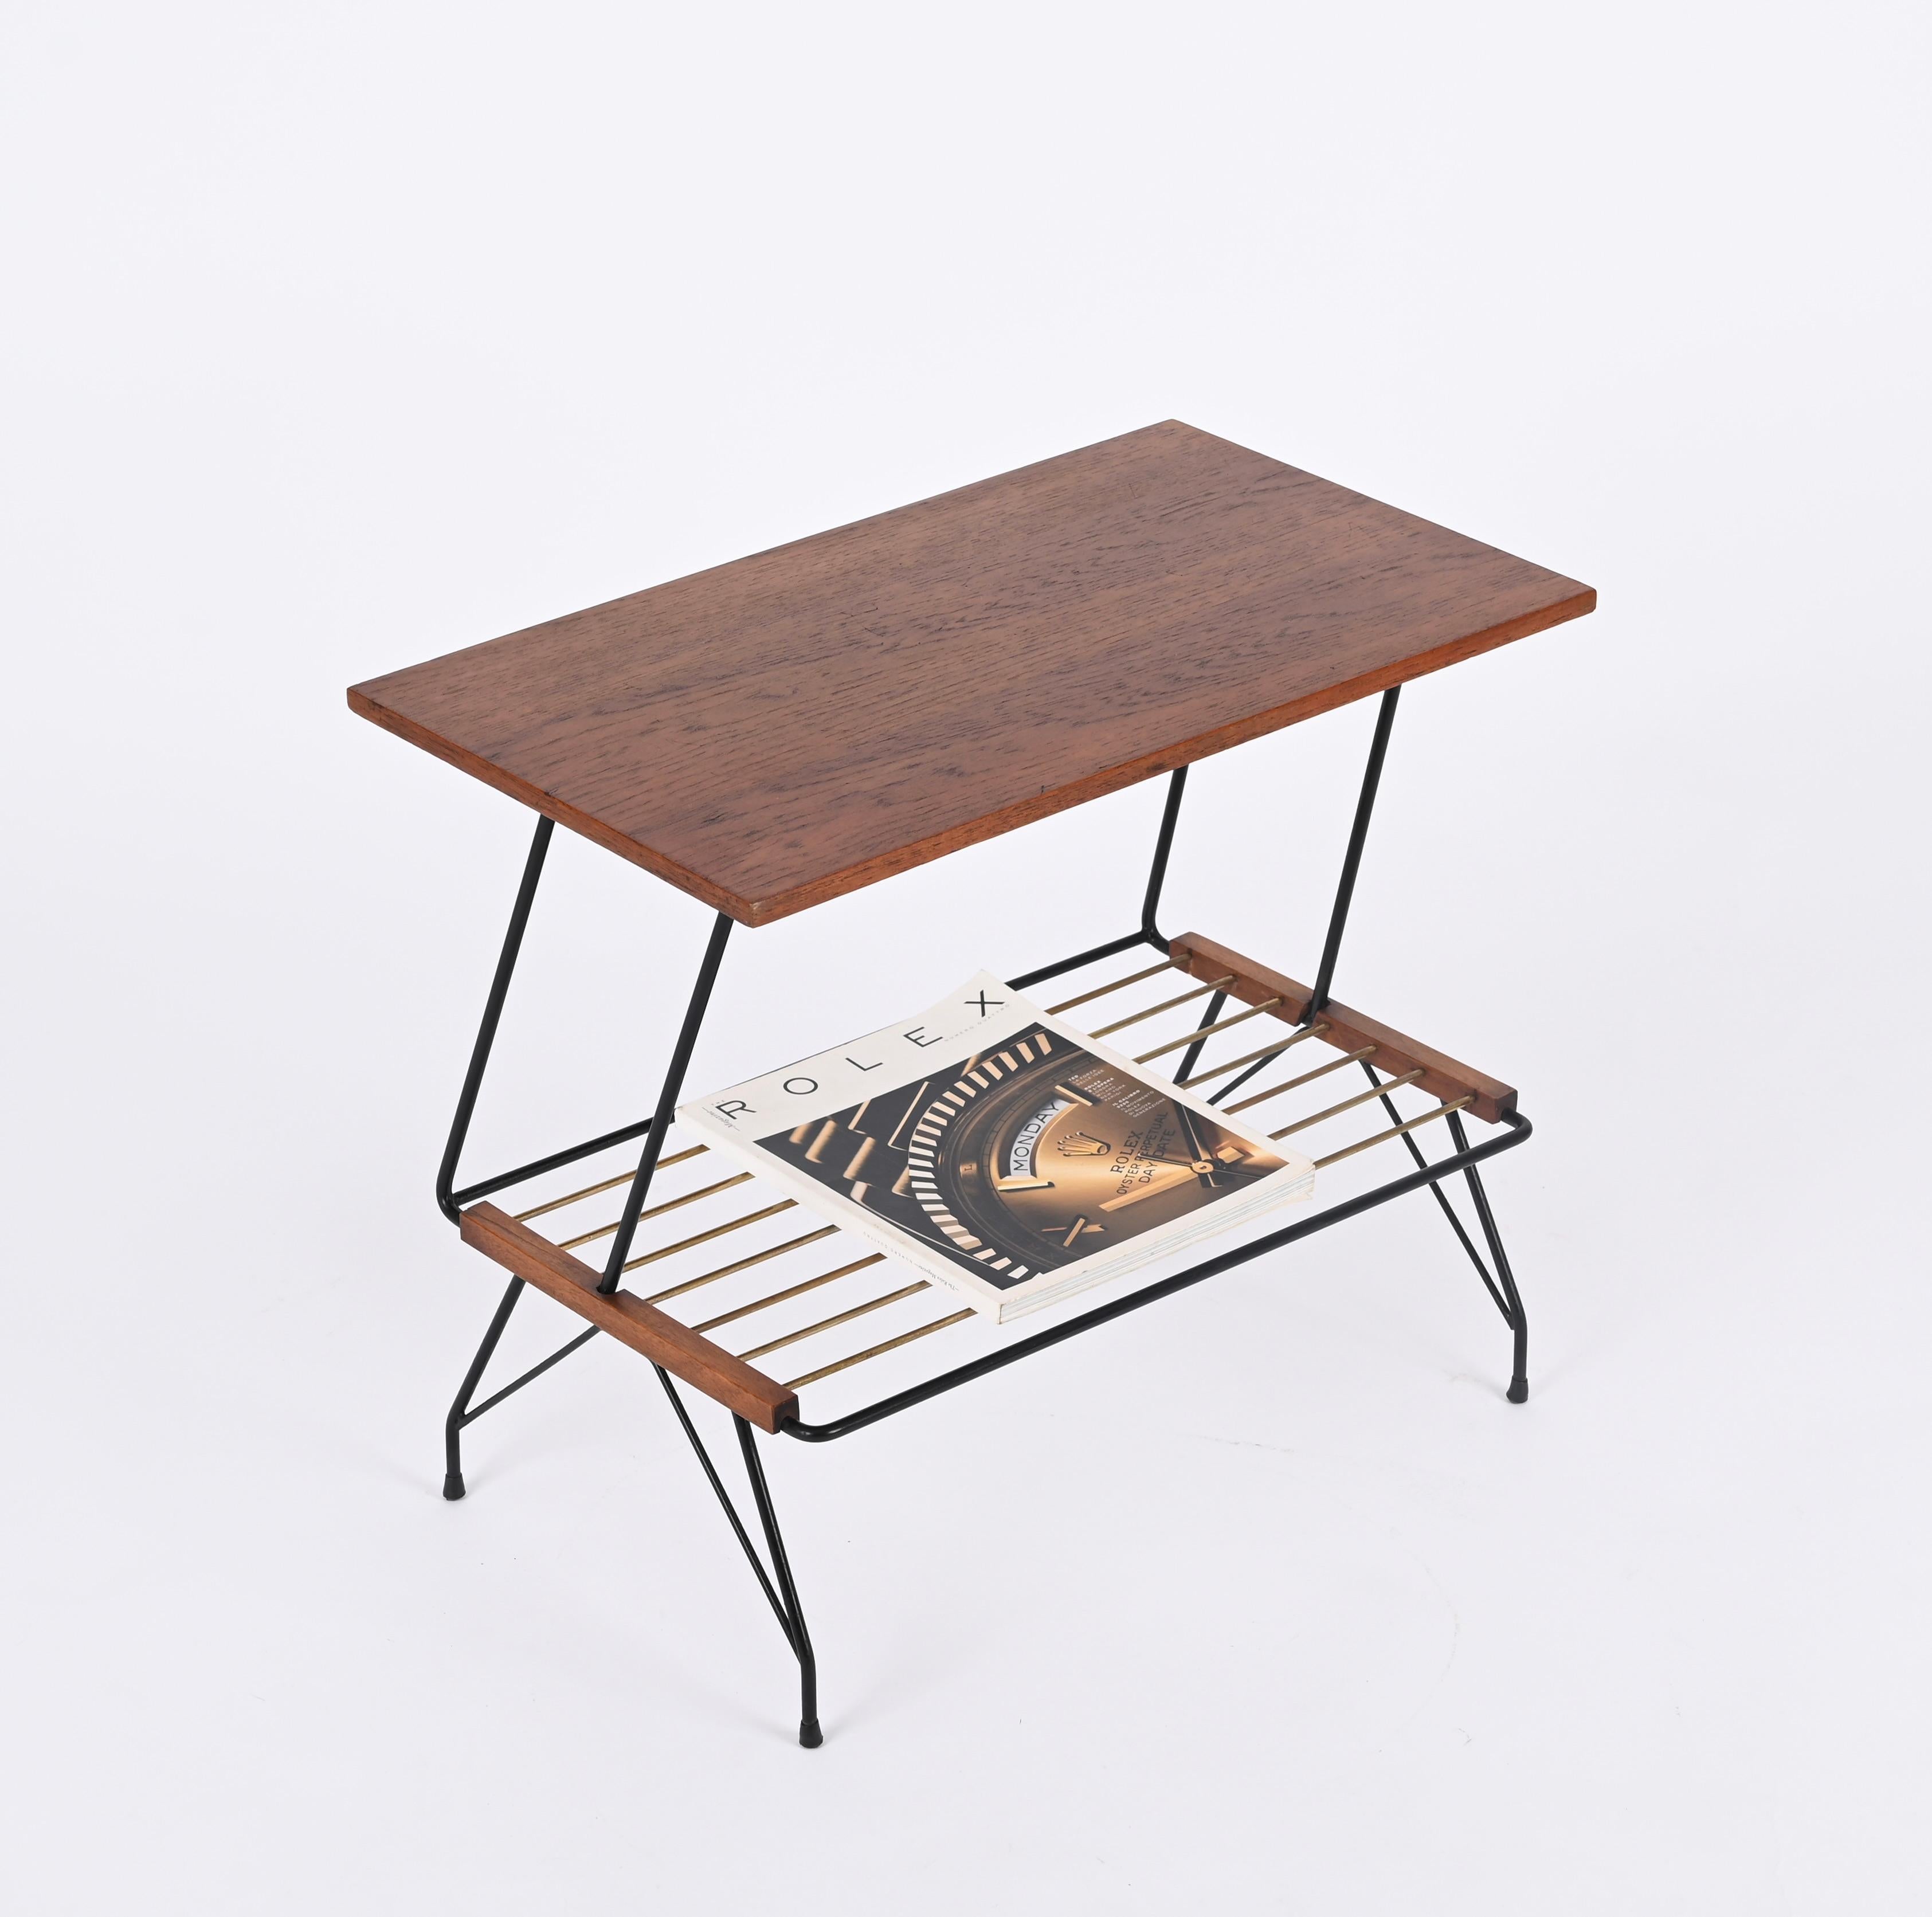 Italian Side or Coffee Table with Brass Magazine Rack by Mobili Pizzetti, 1950s For Sale 6